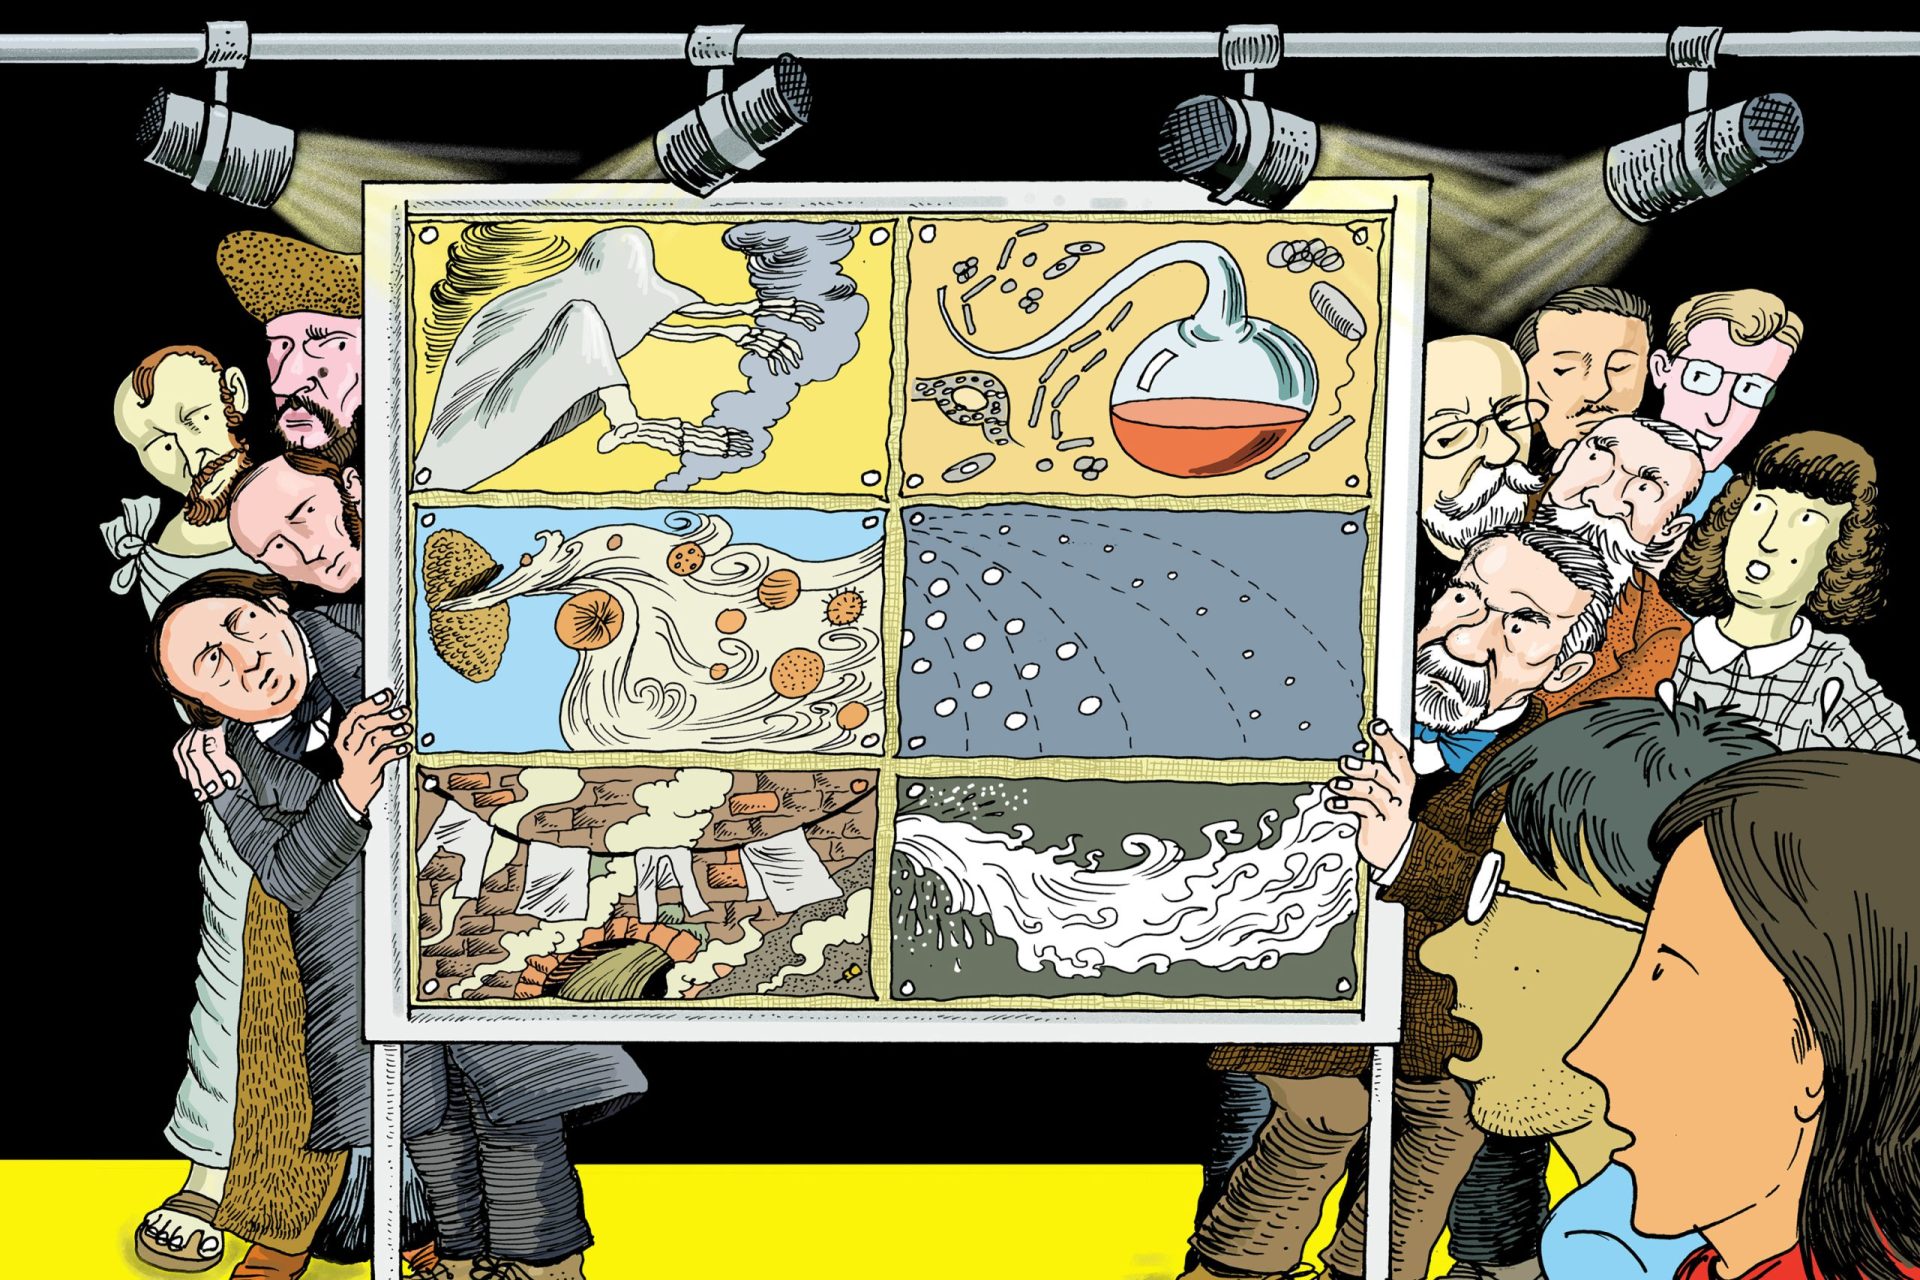 Turning history of science into a comic adventure